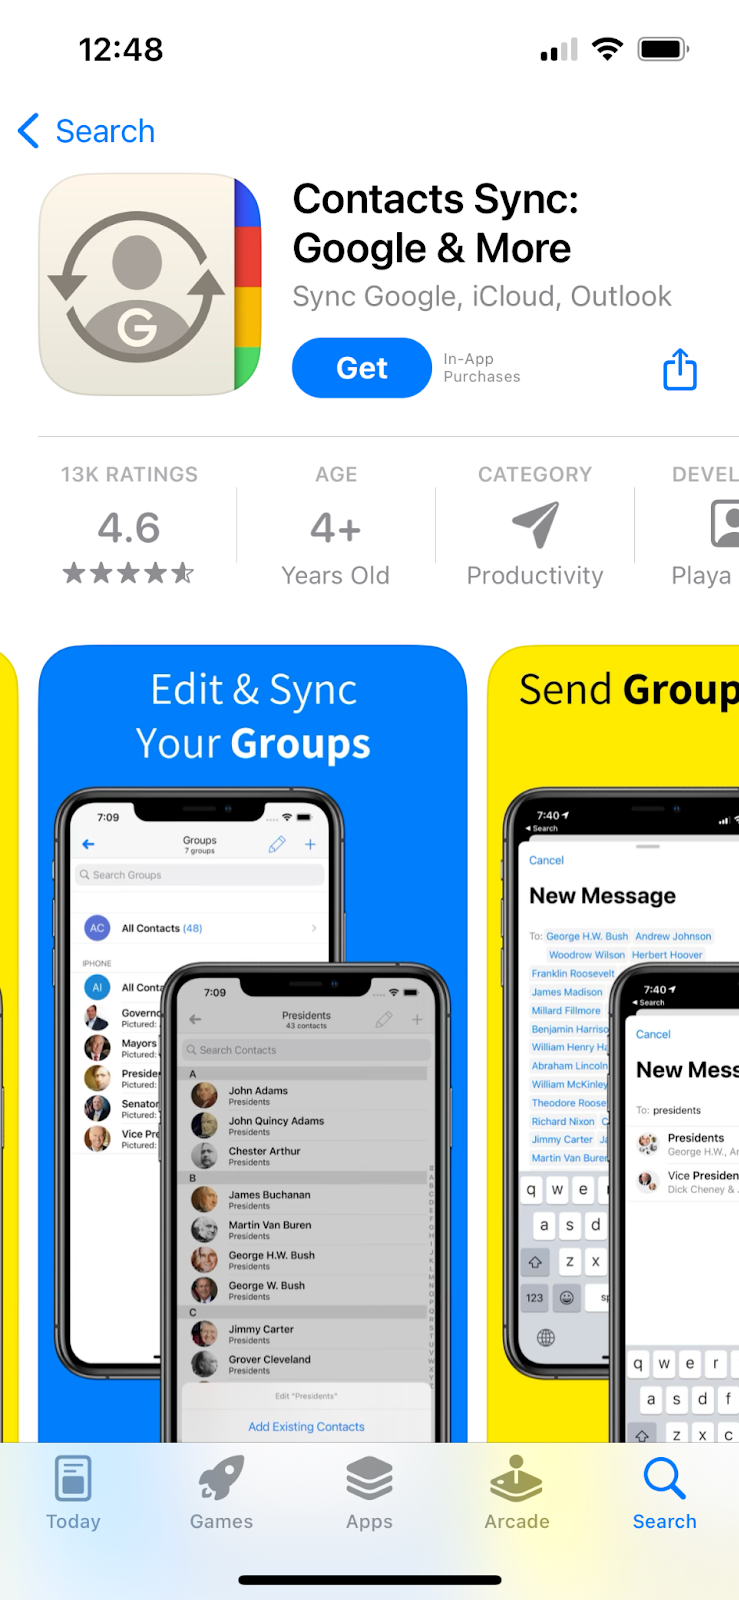 Contacts Sync app home page on App Store